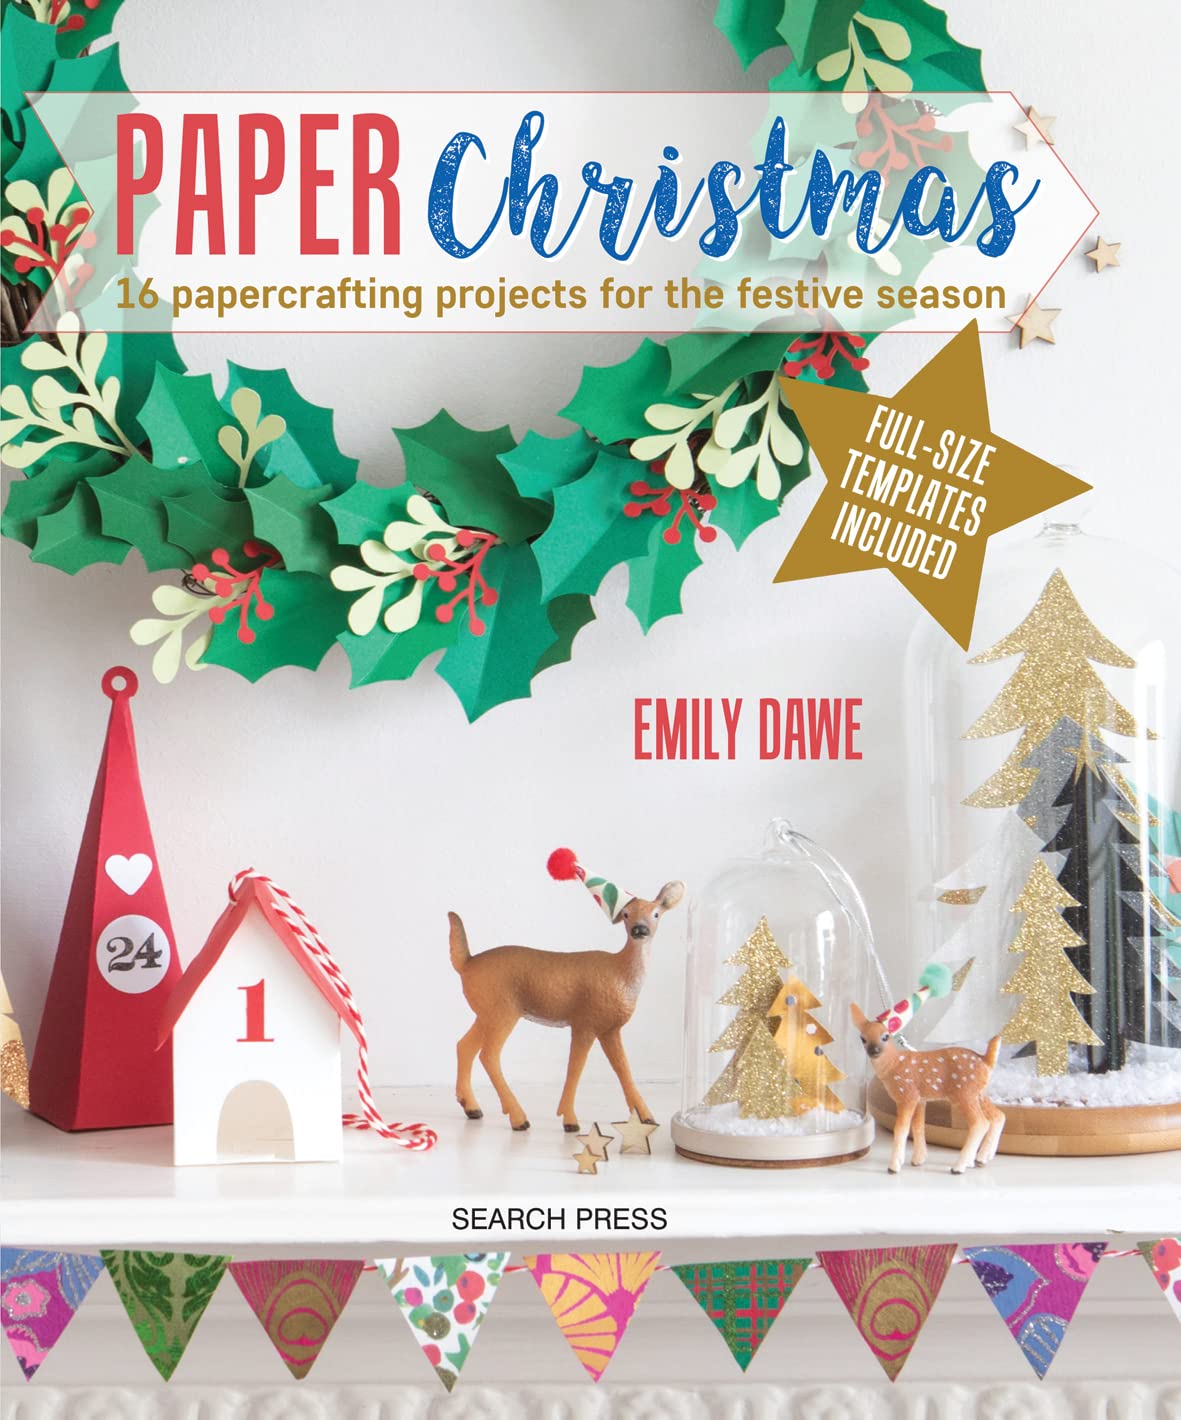 How to make an origami Santa – Paper Christmas book